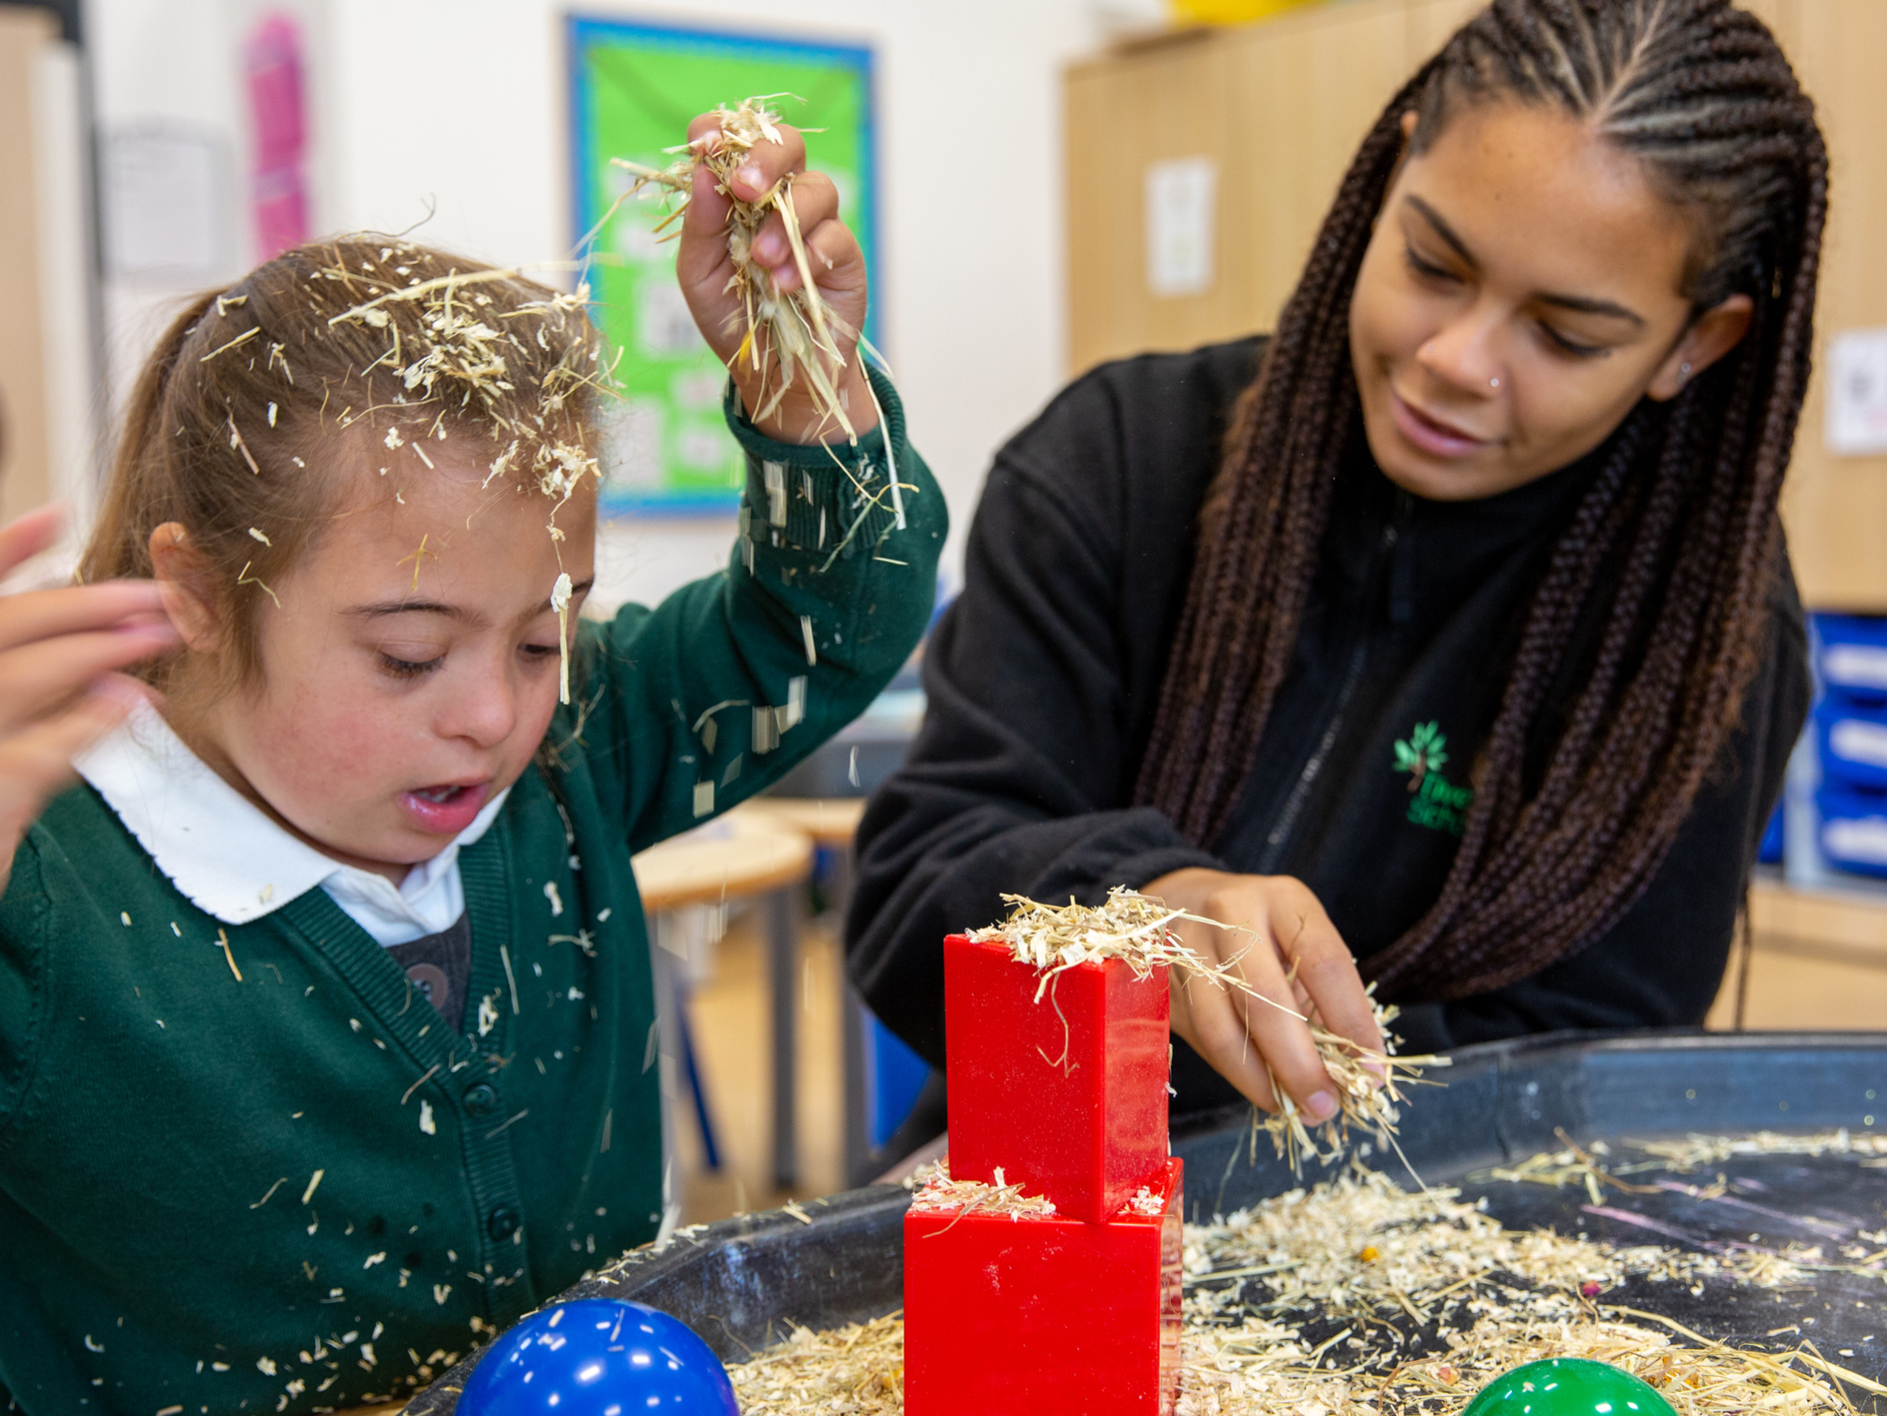 Sensory play with hay at this SEN school in Coventry